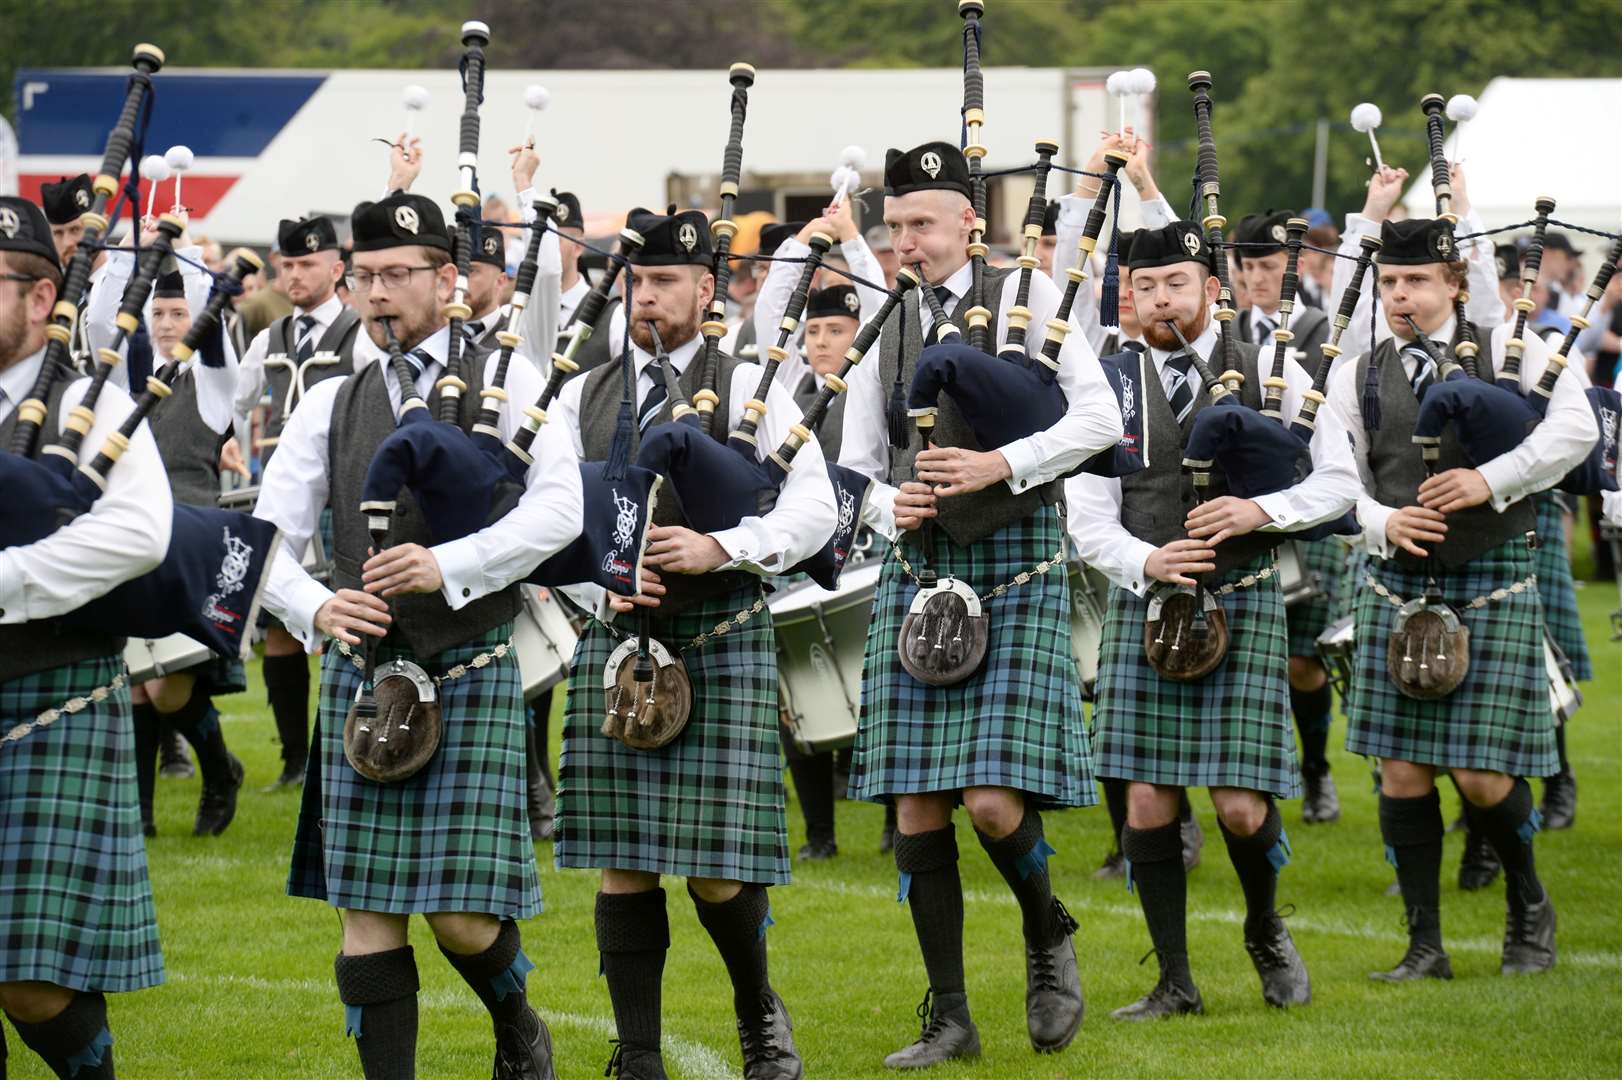 Pipe bands will not be heard at the Bught Park this summer.